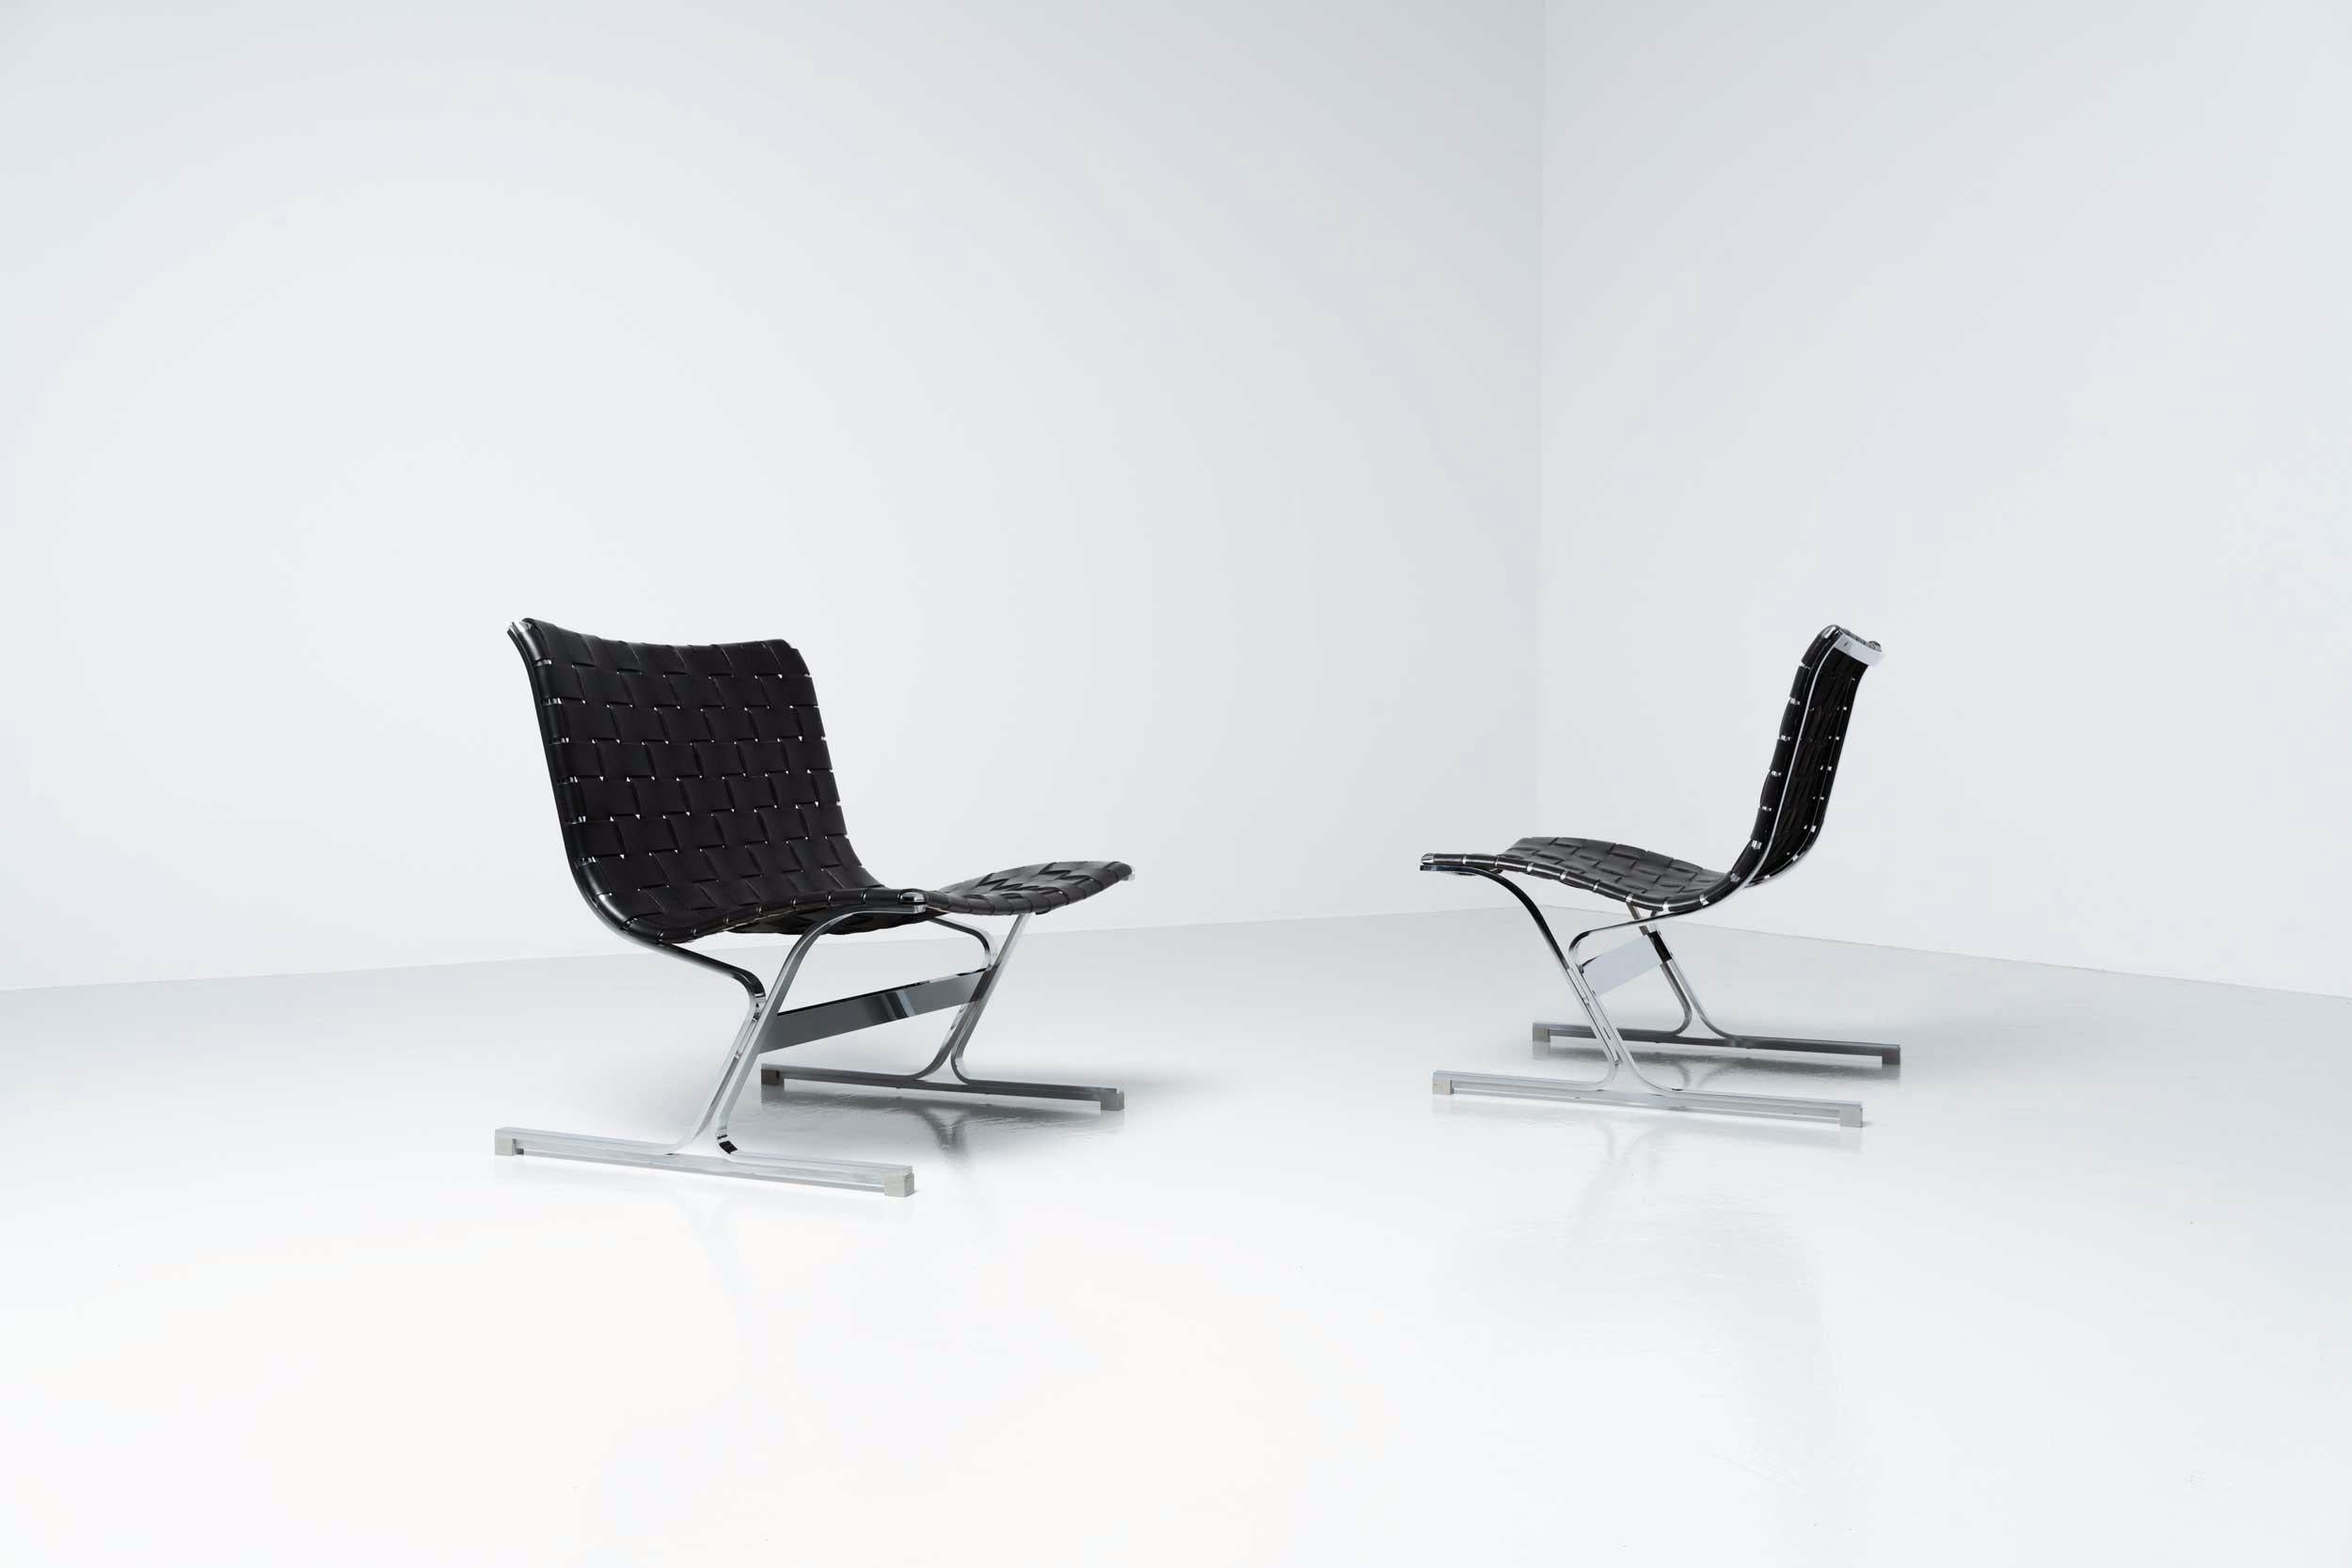 Stunning pair of Luar lounge chairs designed by Ross Littel and manufactured by ICF de Padova, Italy 1965. These amazing lounge chairs are made of chrome plated solid metal frames with amazing black leather straps that are still original and have a